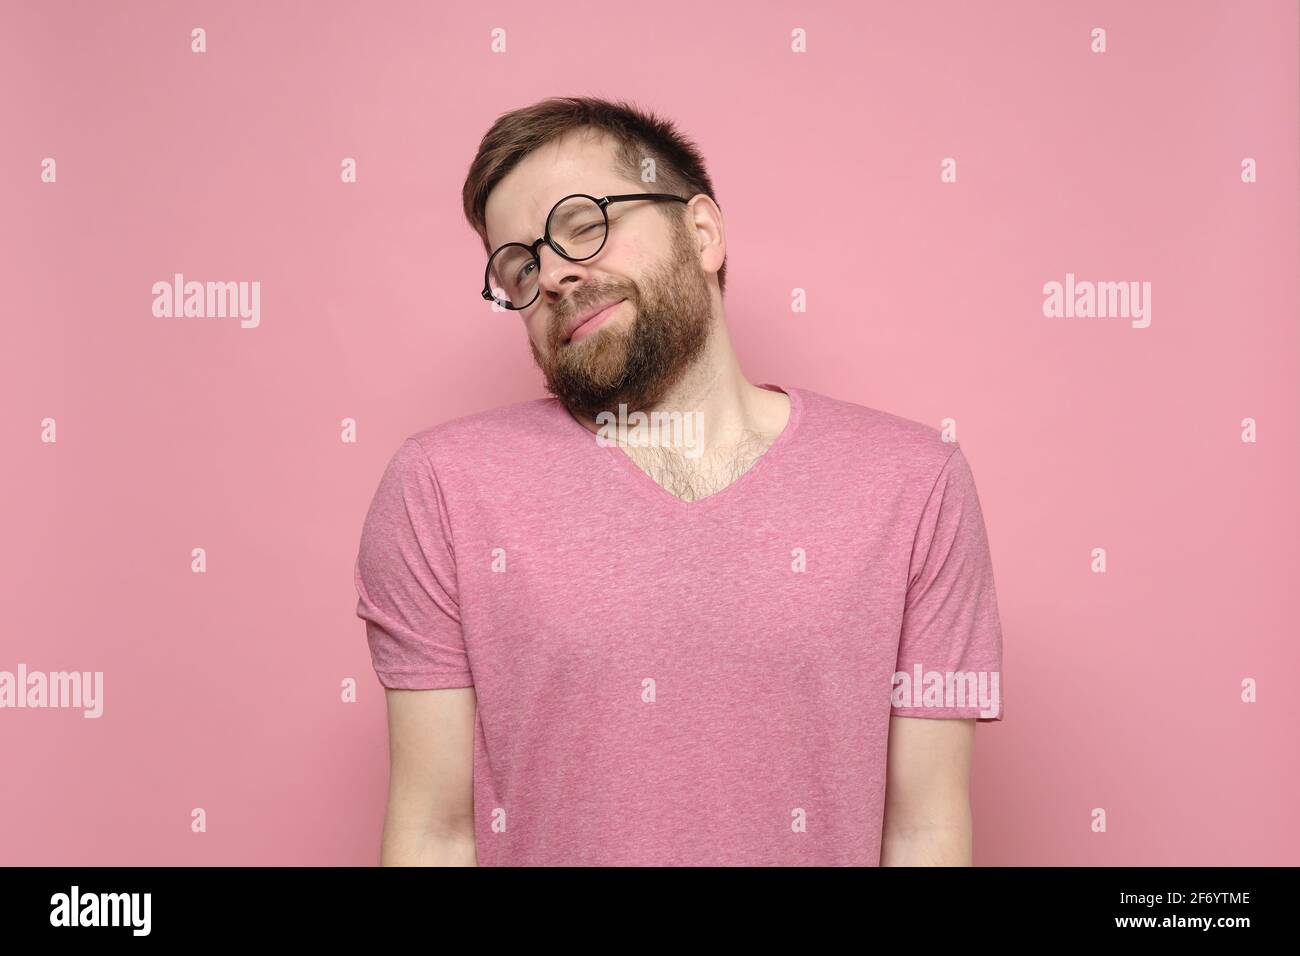 Cute, shy man with glasses hunched shoulders and looked with narrowed eyes at the camera. Pink background. Stock Photo